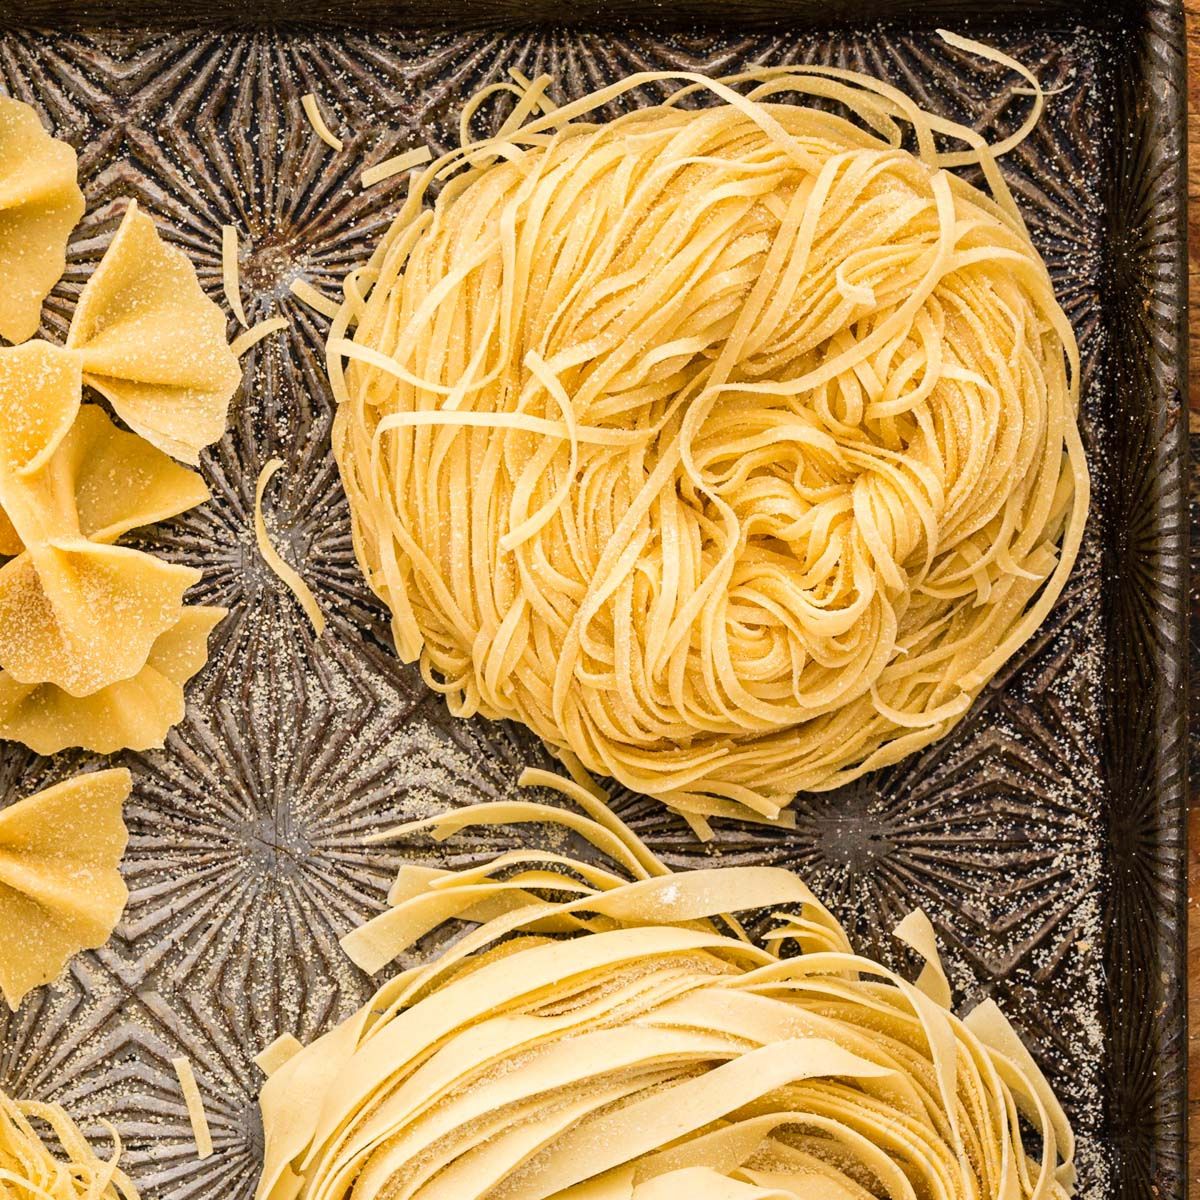 How to Make All Kinds of Homemade Pasta